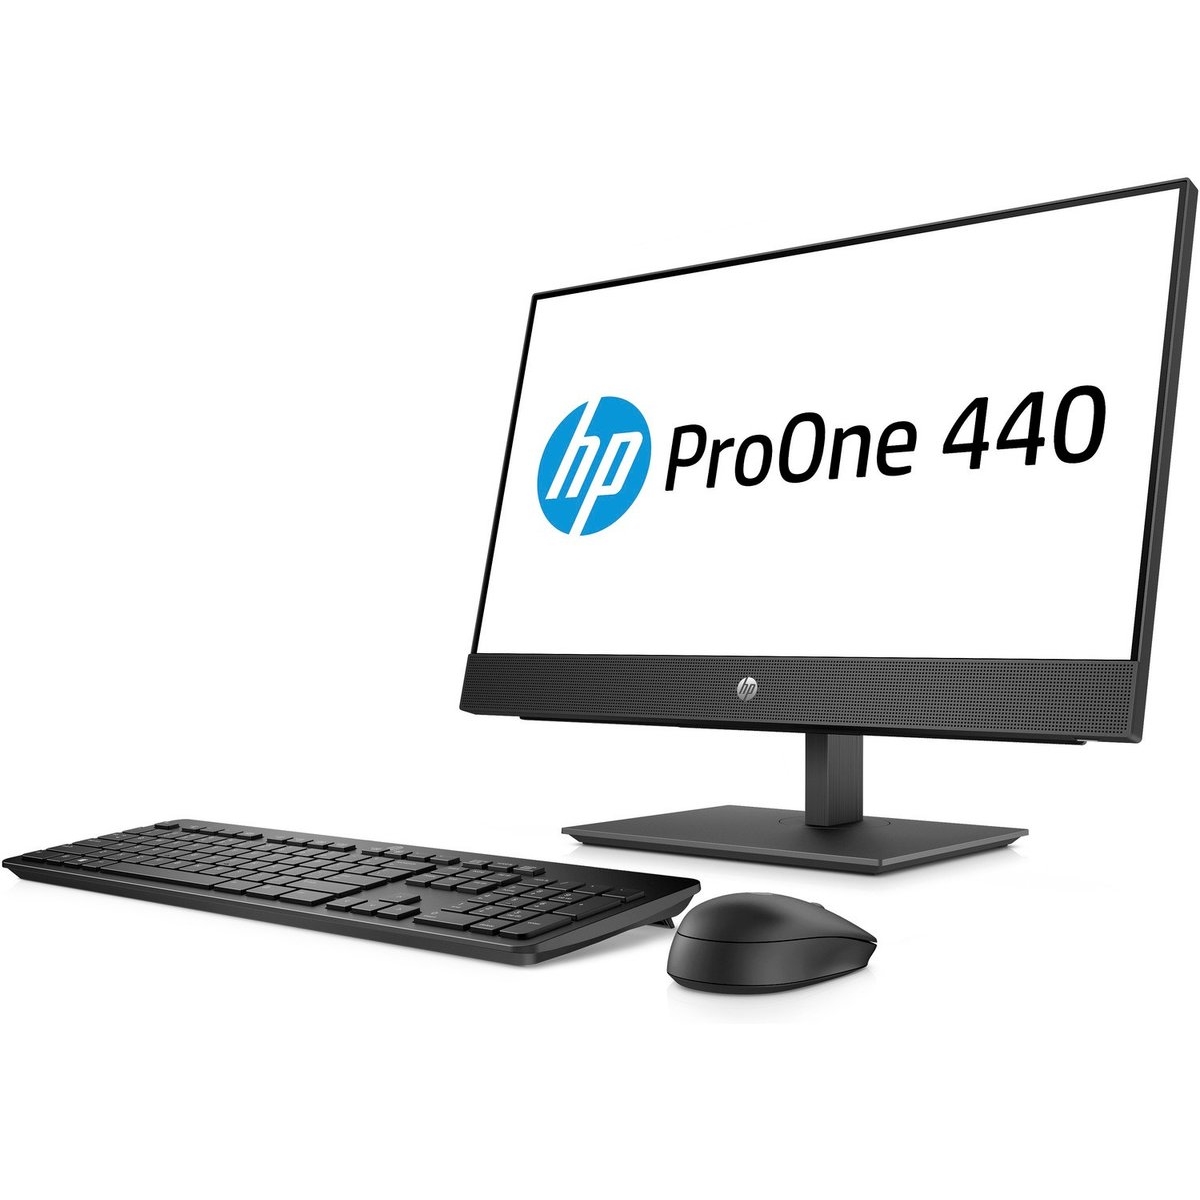 HP PROONE 440 G4 4NT87EA i5-8500T 4GB 1TB O/B VGA 23.8" NONTOUCH FREDOOS ALL IN ONE PC